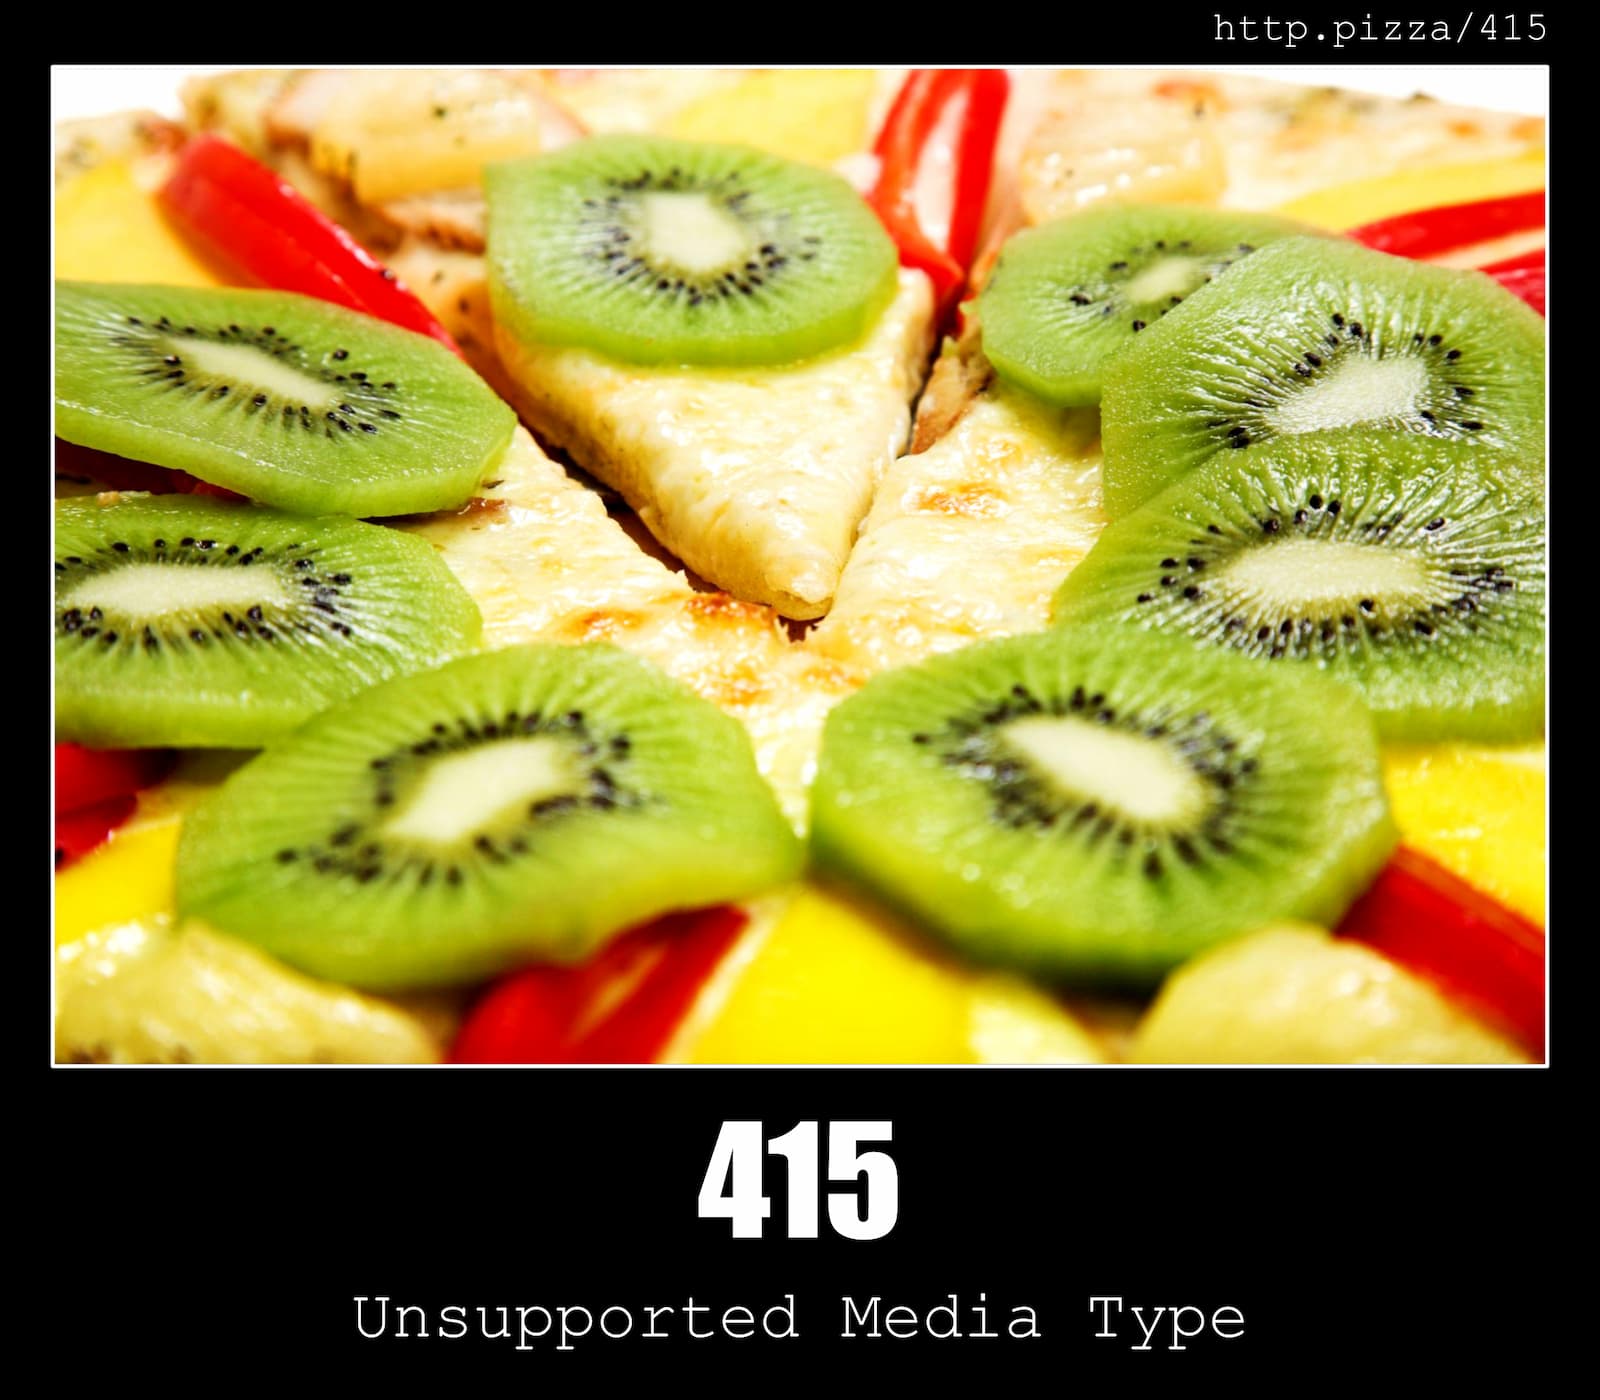 HTTP Status Code 415 Unsupported Media Type & Pizzas